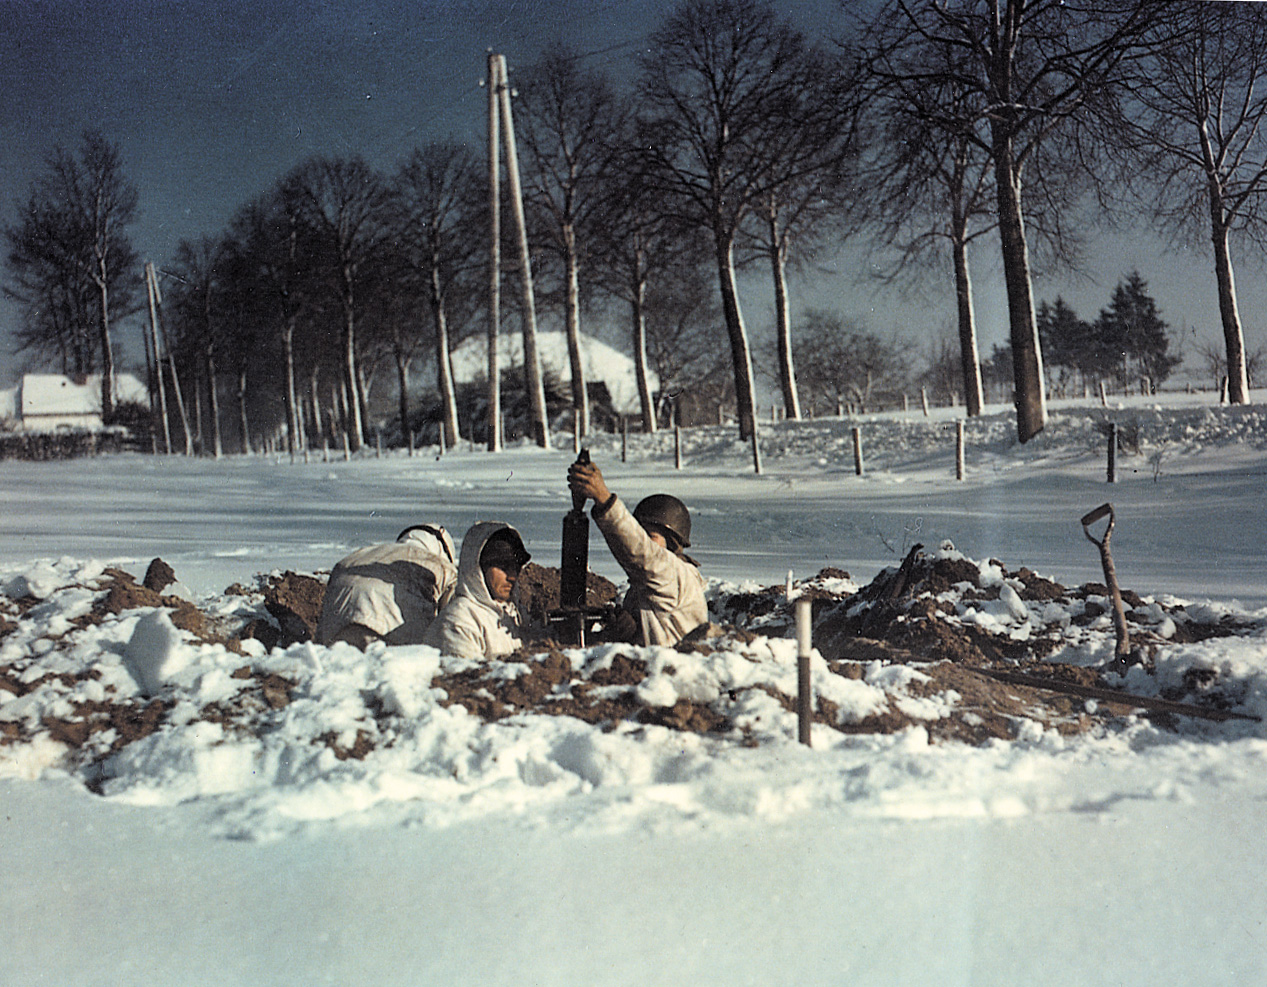 With St. Vith taken, a mortar team prepares to fire on the retreating Germans. Digging holes in the frozen terrain proved a difficult task, and some men resorted to blasting holes with dynamite to loosen the soil.